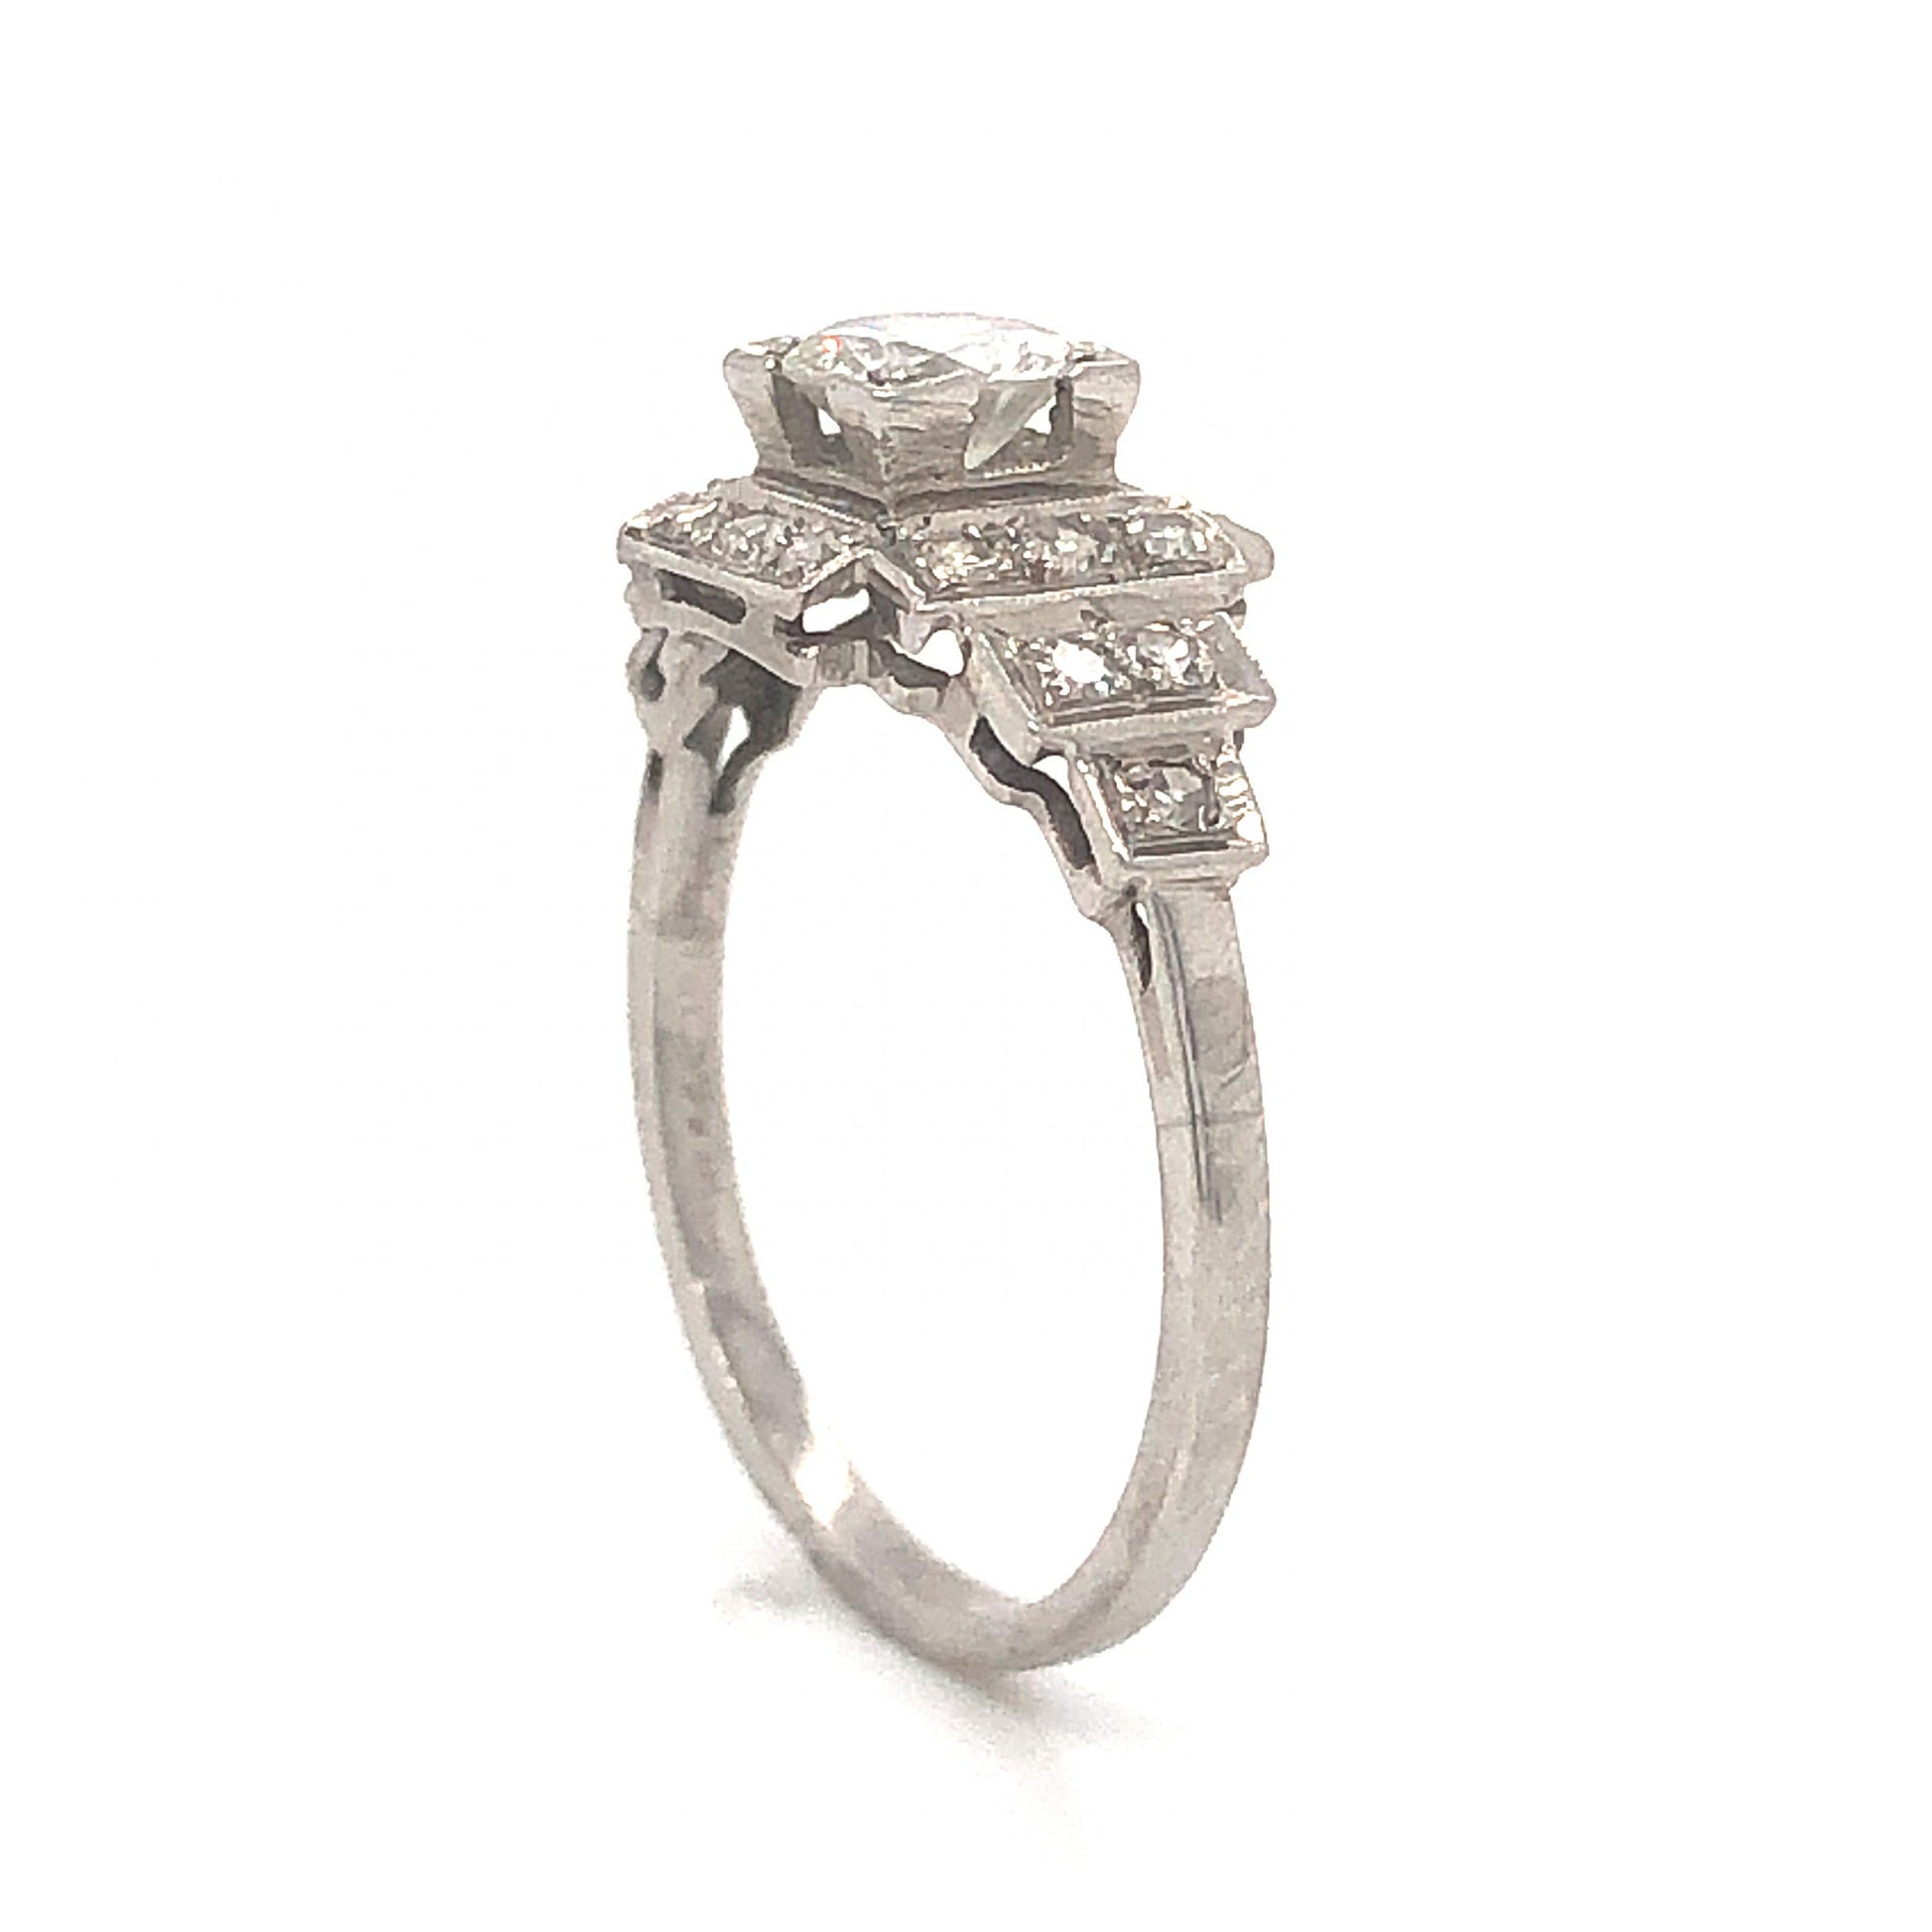 .52 Art Deco Diamond Engagement Ring in PlatinumComposition: Platinum Ring Size: 7.25 Total Diamond Weight: .82ct Total Gram Weight: 3.0 g Inscription: 1860 PLAT 10% IRID
      